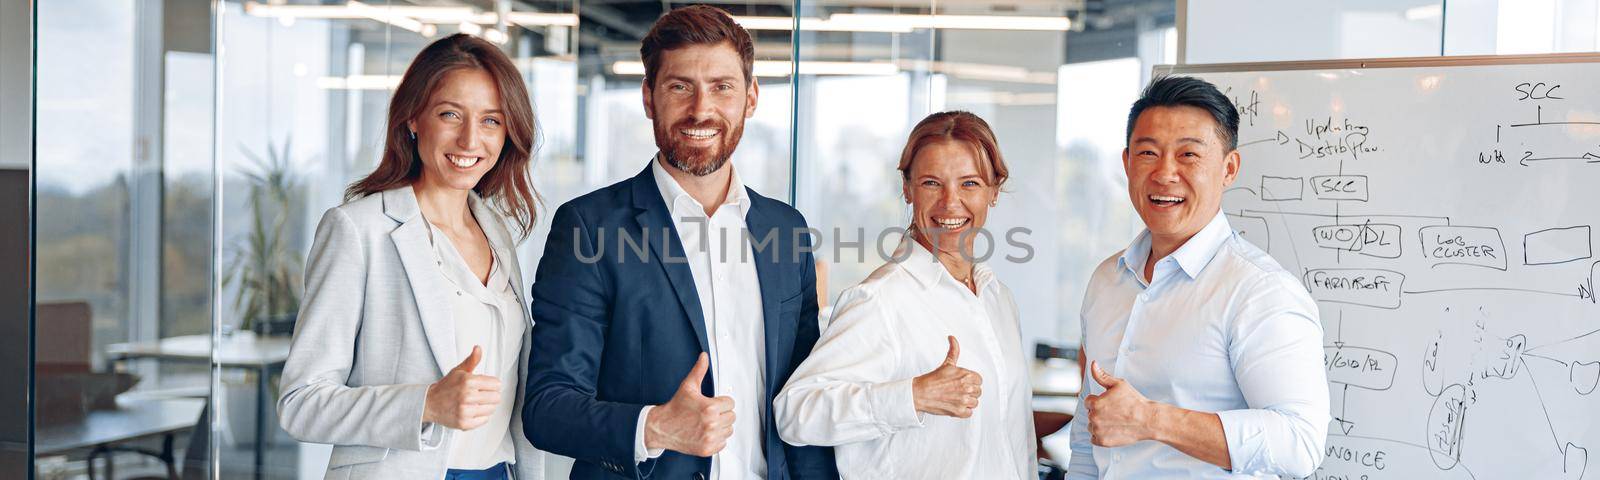 Office employees group showing thumbs up looking at camera, happy professional multicultural team by Yaroslav_astakhov